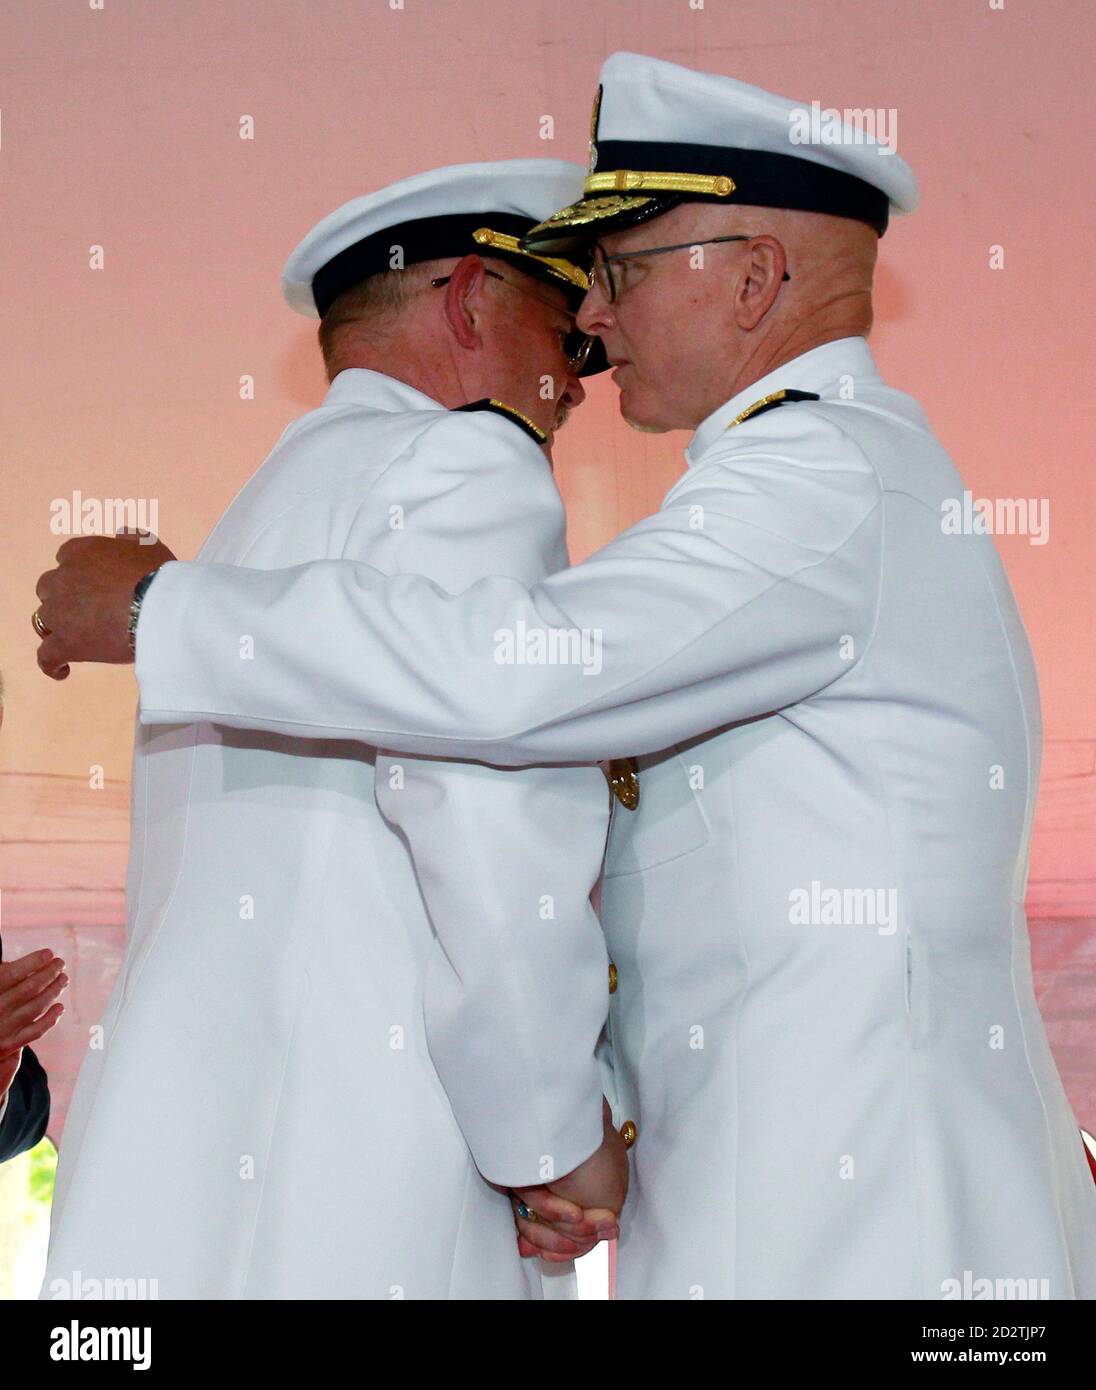 New Commandant of the U.S. Coast Guard Admiral Robert J. Papp, Jr. (R) hugs his predecessor Admiral Thad W. Allen during a Change of Command ceremony in Washington May 25, 2010.  REUTERS/Jim Young   (UNITED STATES - Tags: POLITICS MILITARY) Stock Photo